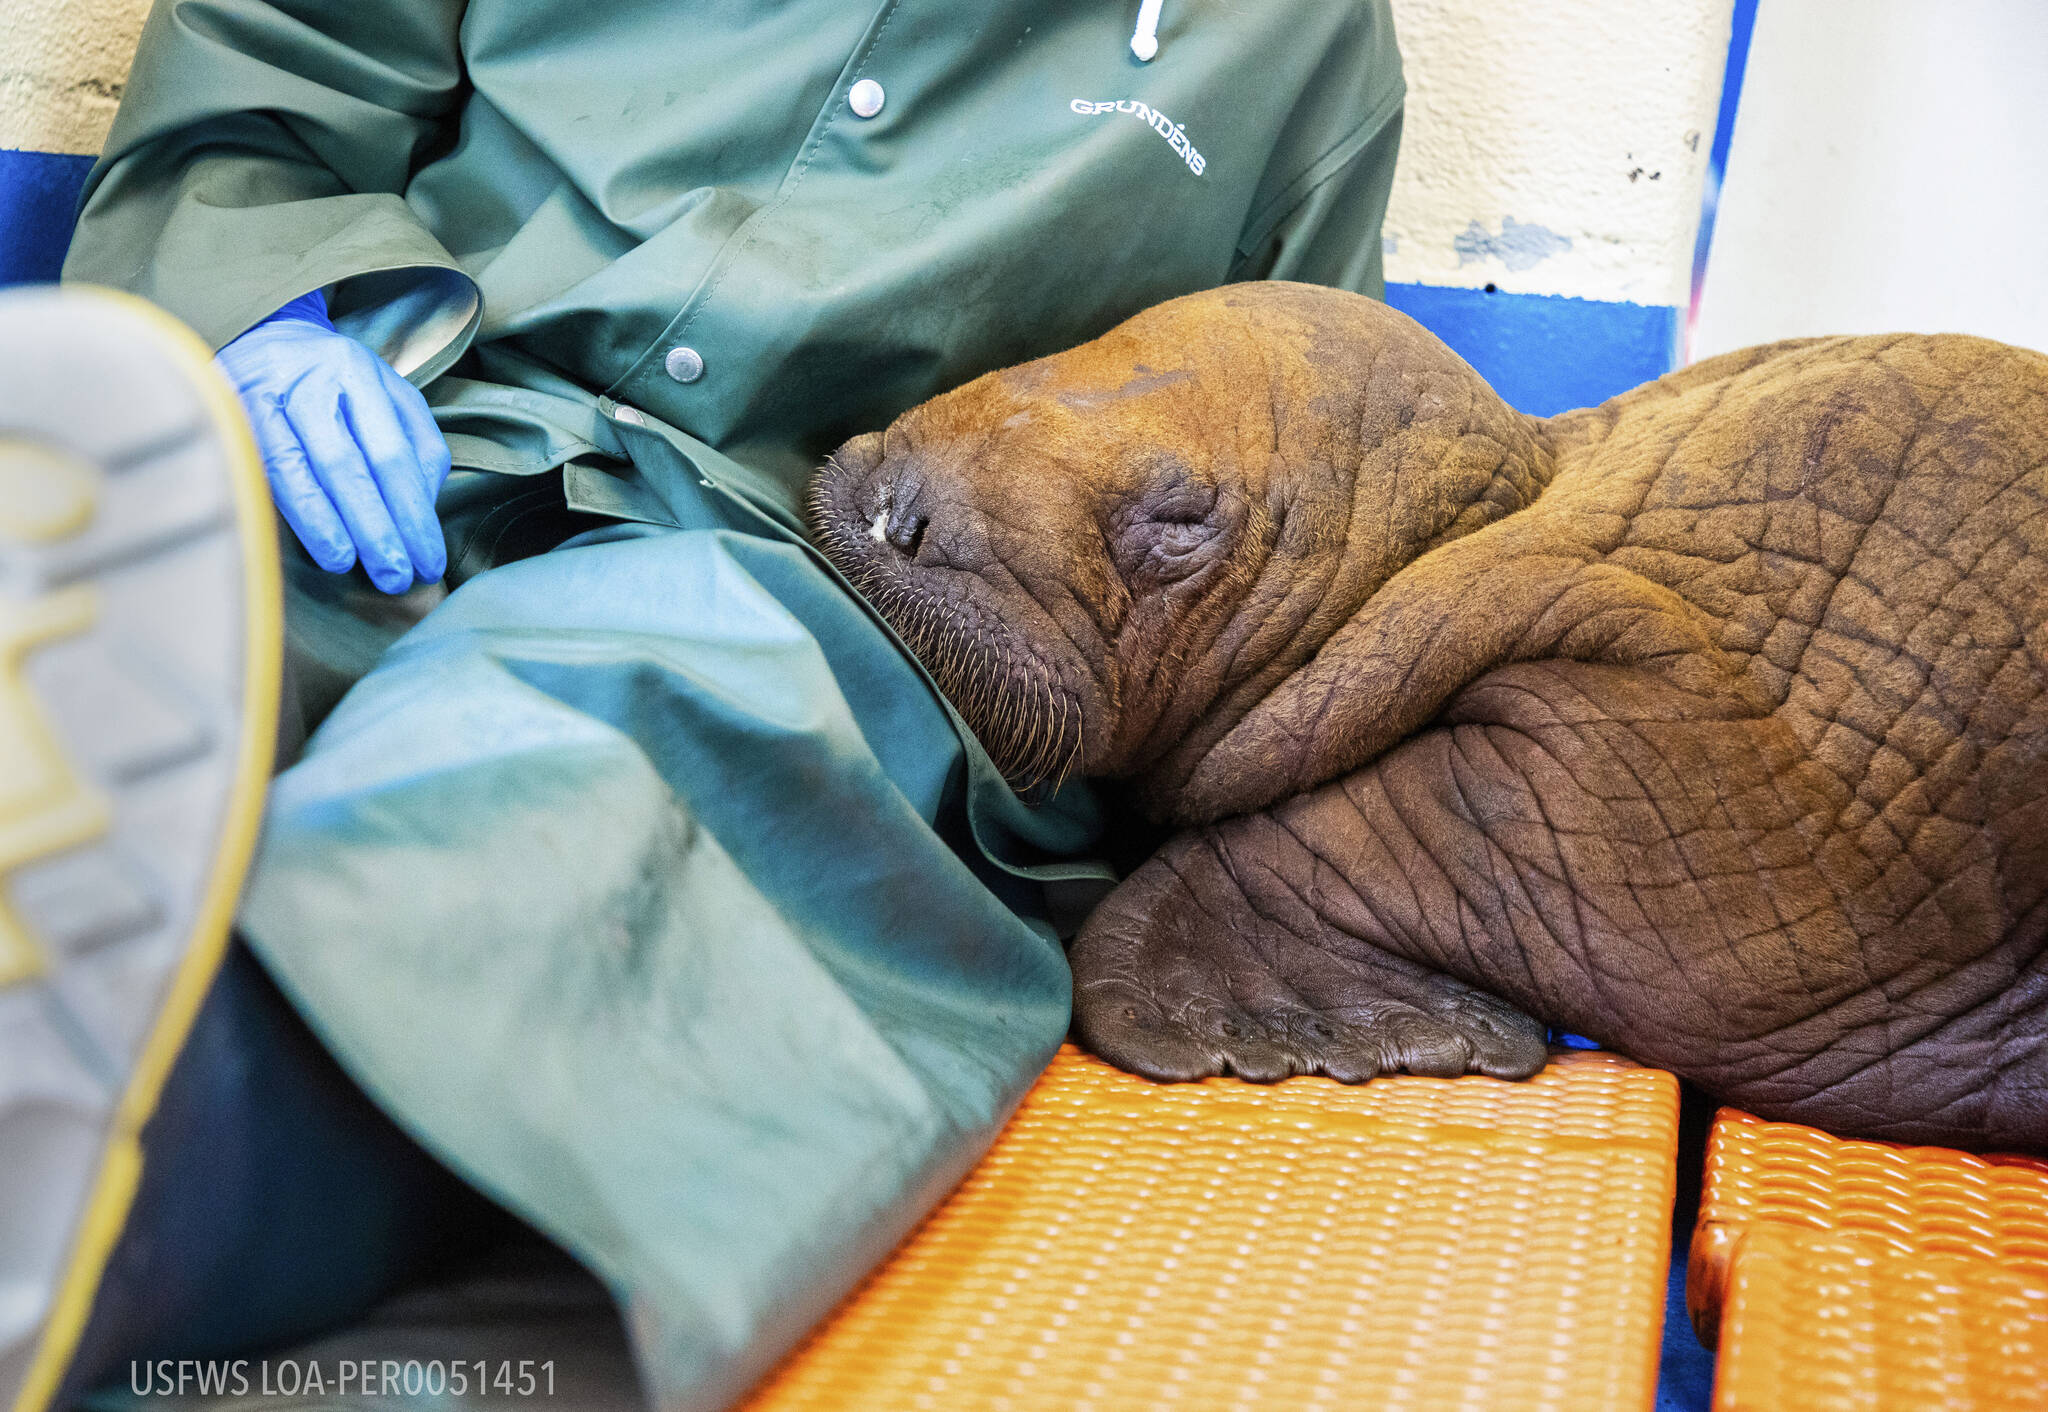 In this photo provided by the Alaska SeaLife Center, a Pacific walrus pup rests his head on the lap of a staff member after being admitted to the center’s Wildlife Response Program in Seward on Aug. 1. A walrus calf found by oil field workers in Alaska about 4 miles (6.4 kilometers) inland is under 24-hour care as the Alaska SeaLife Center nurses it back to health. The male Pacific walrus was transported across the state Tuesday from the North Slope to Seward in south-central Alaska, where the Alaska SeaLife Center is based. (Kaiti Grant/Alaska SeaLife Center via AP)